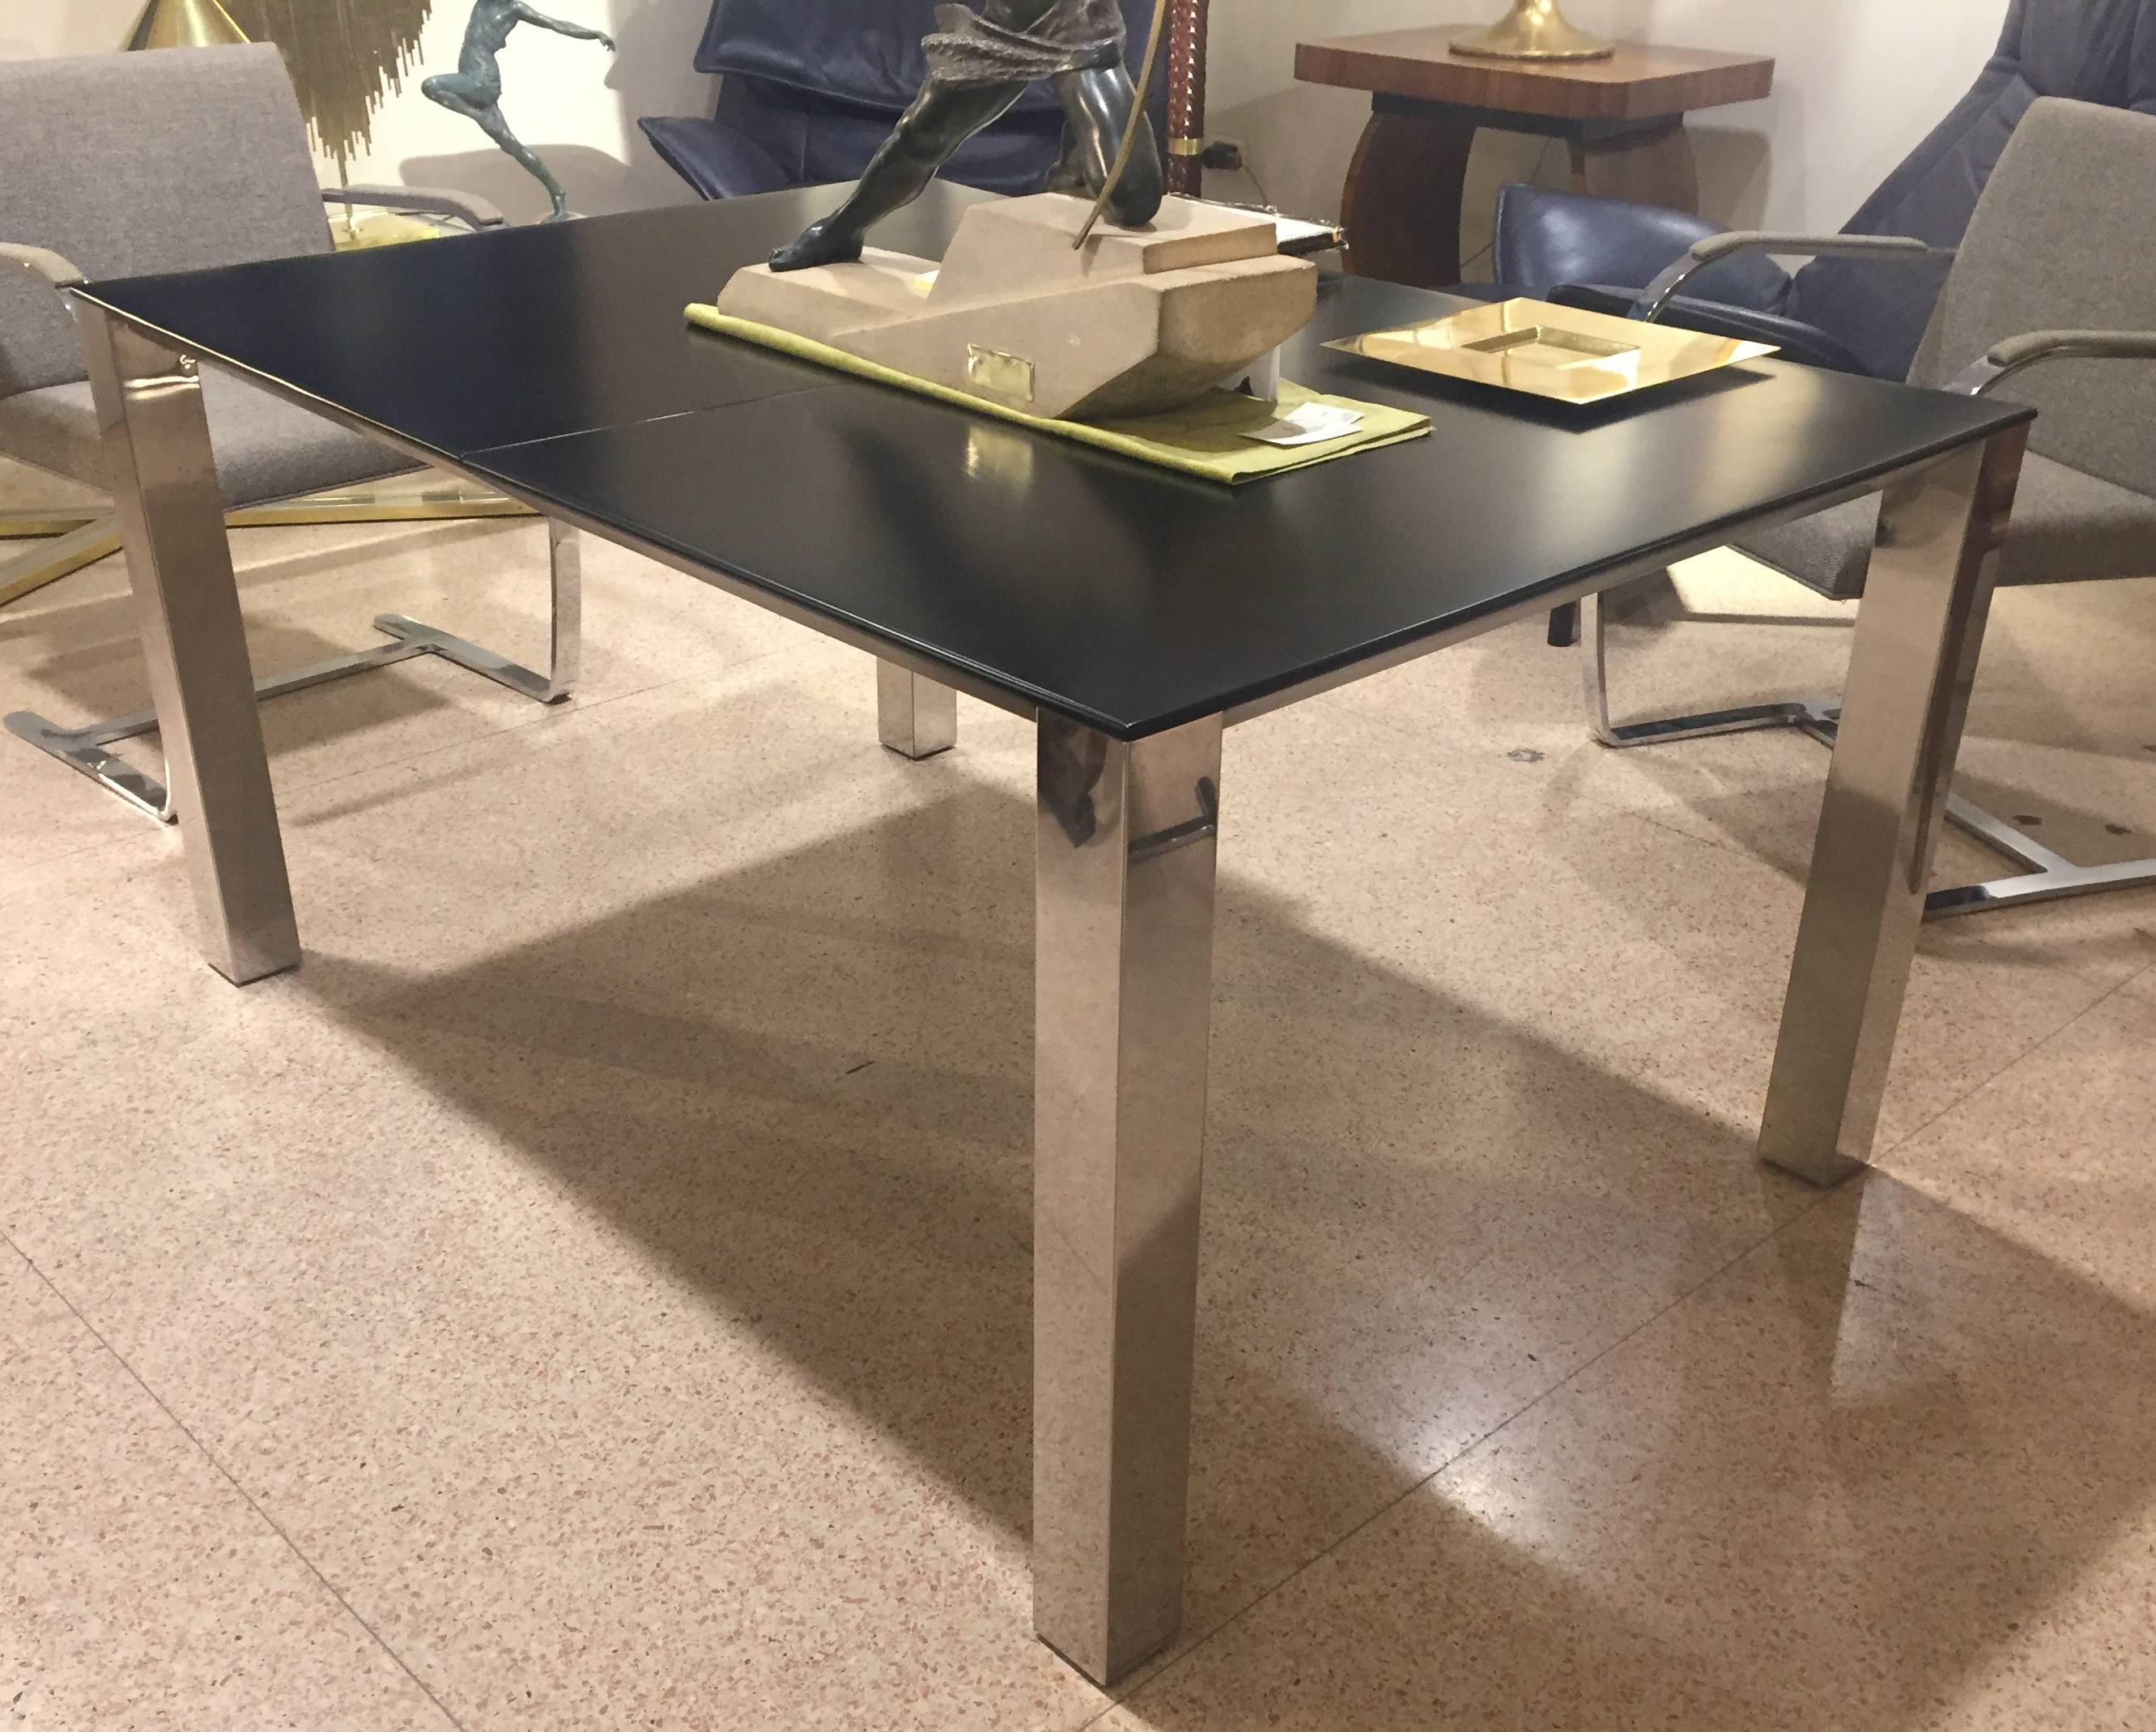 Extensible table designed by Giovanni Offredi in 1960s and produced by Saporiti. The table features a wood top and chromed steel legs. It is extensible up to 200 cm. Size (closed) 140 x 100 cm, H 71.5
No restoration needed.


 